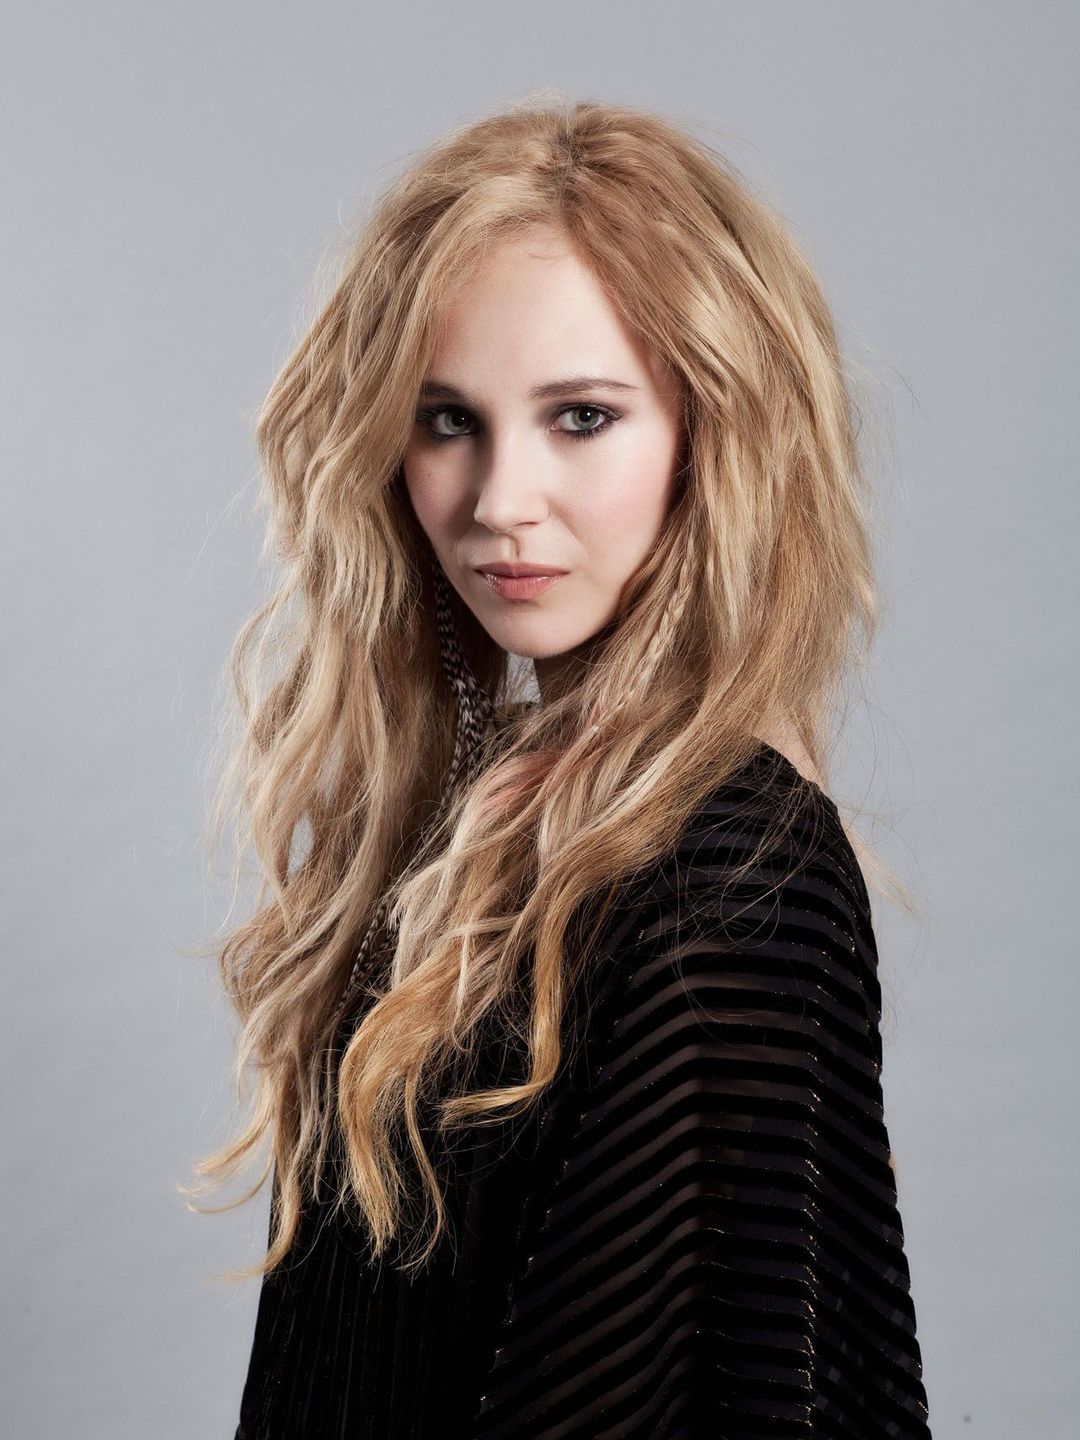 Juno Temple who is her mother